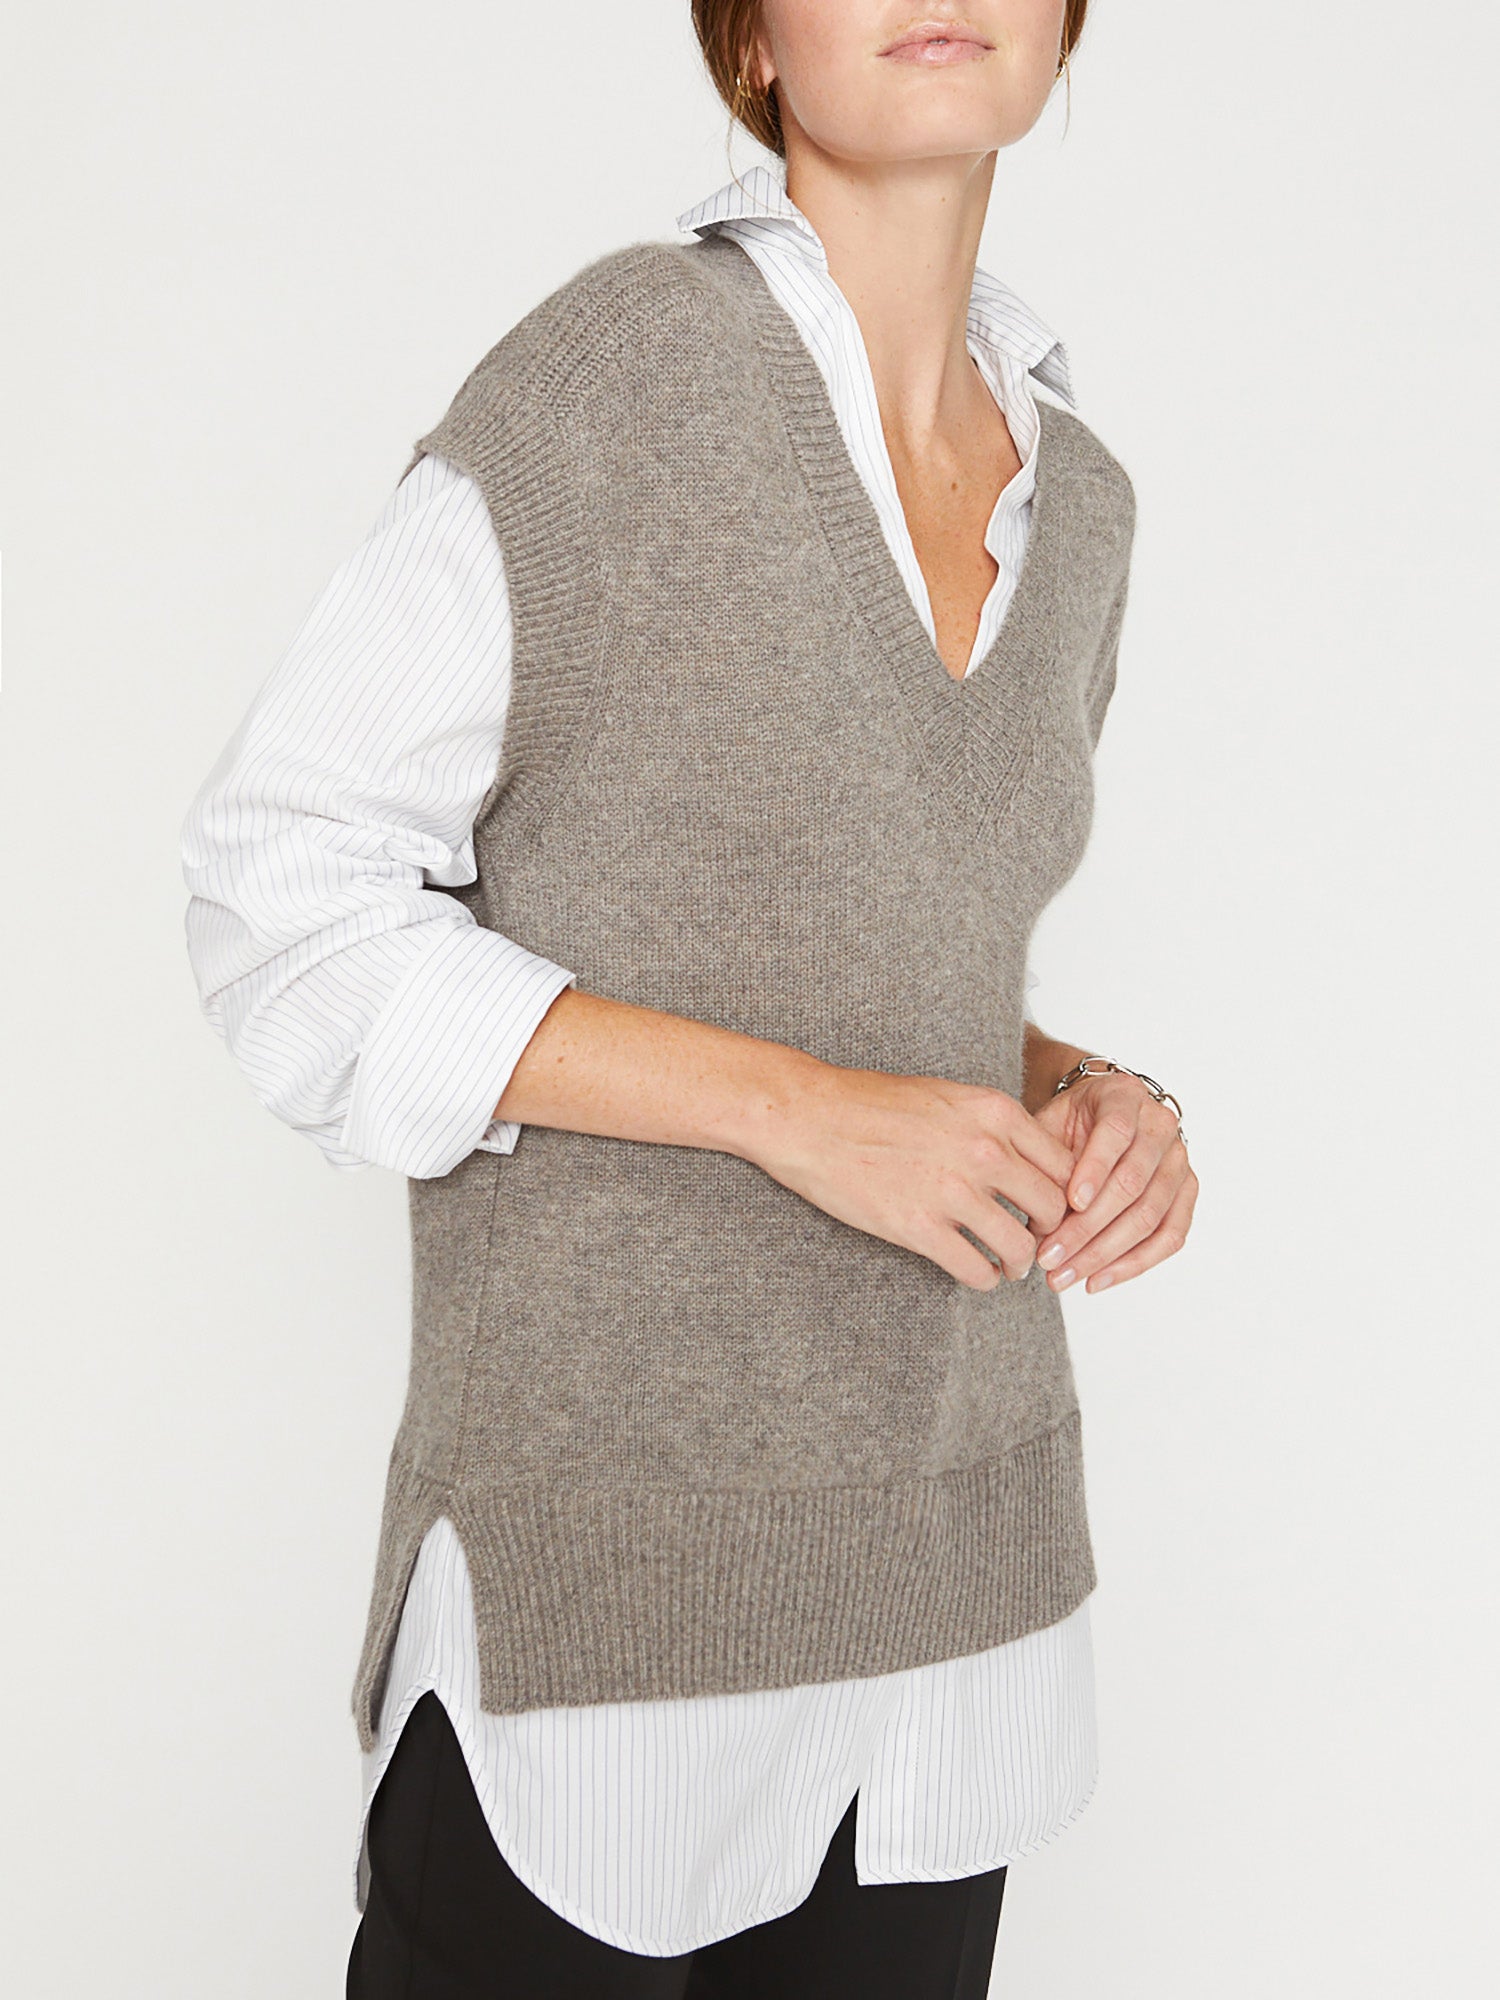 Nye grey v-neck vest with stripe shirt sleeves front view 3